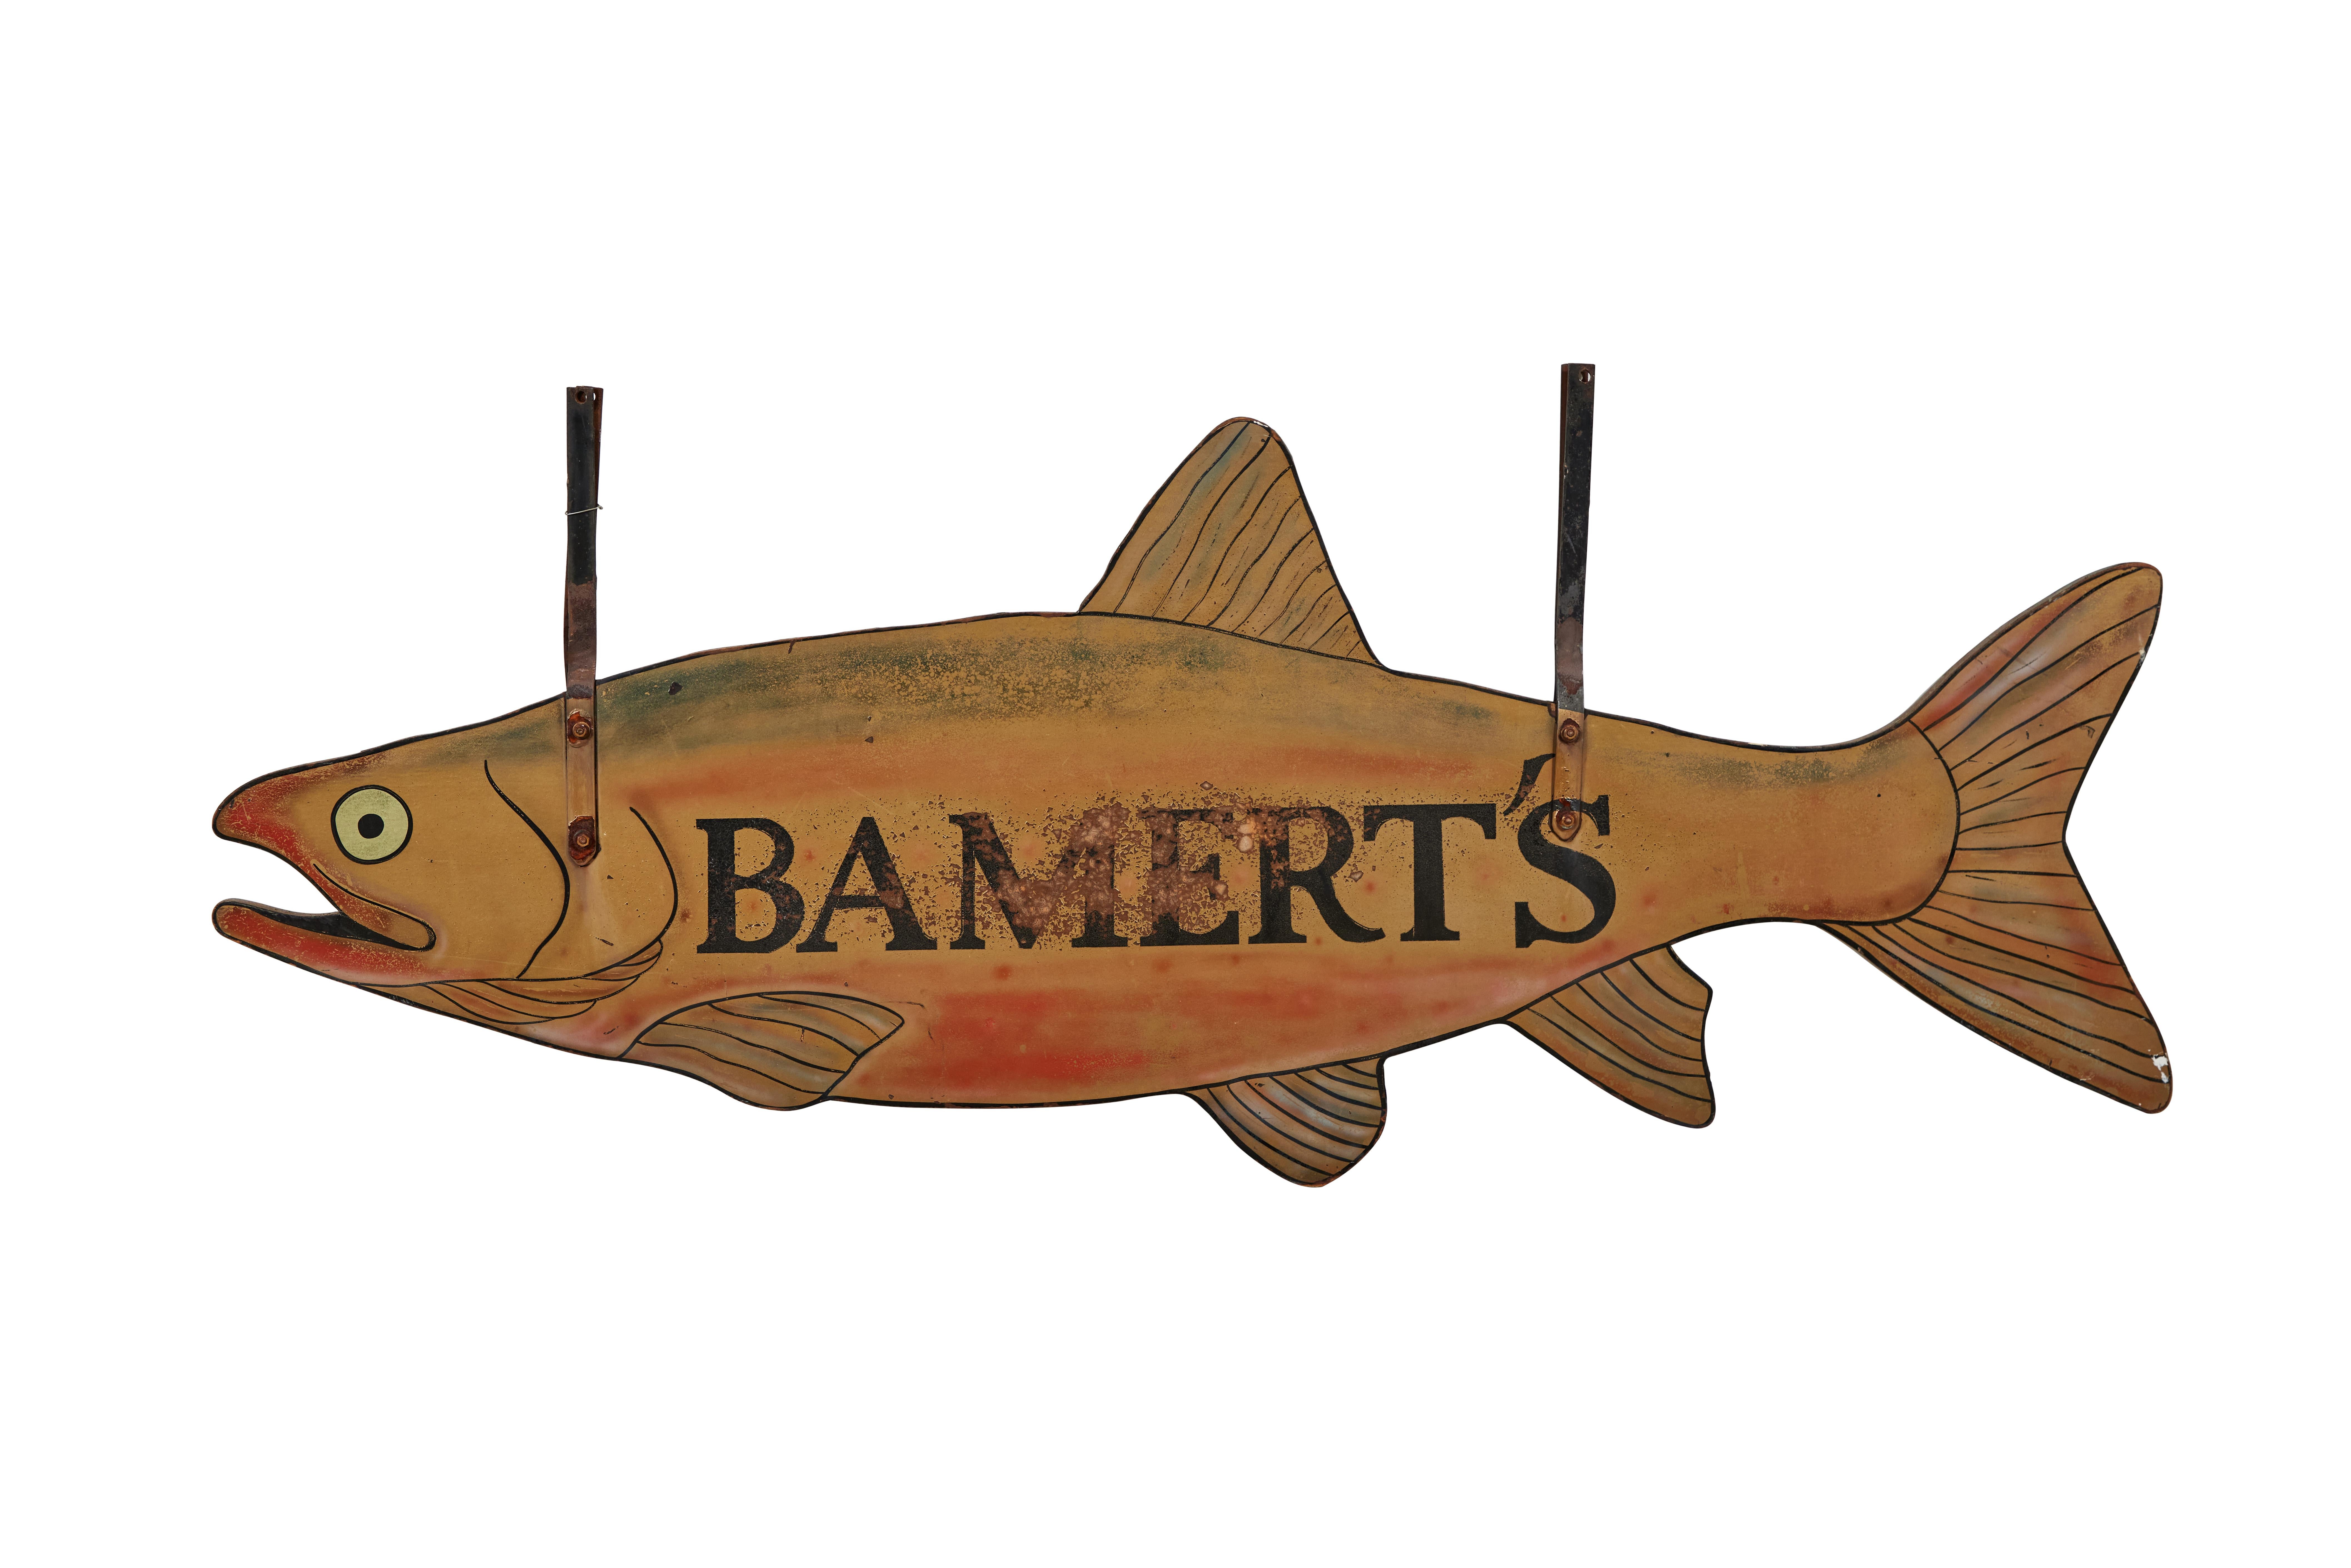 Almost six foot long wood fish double-sided trade sign. Original hand painted surface with heavy iron strap hangers. . Found in the northeast. Perhaps for a fish market or fishing supply store. Nice graphic sign, Please note 1st Dibs shipping prices